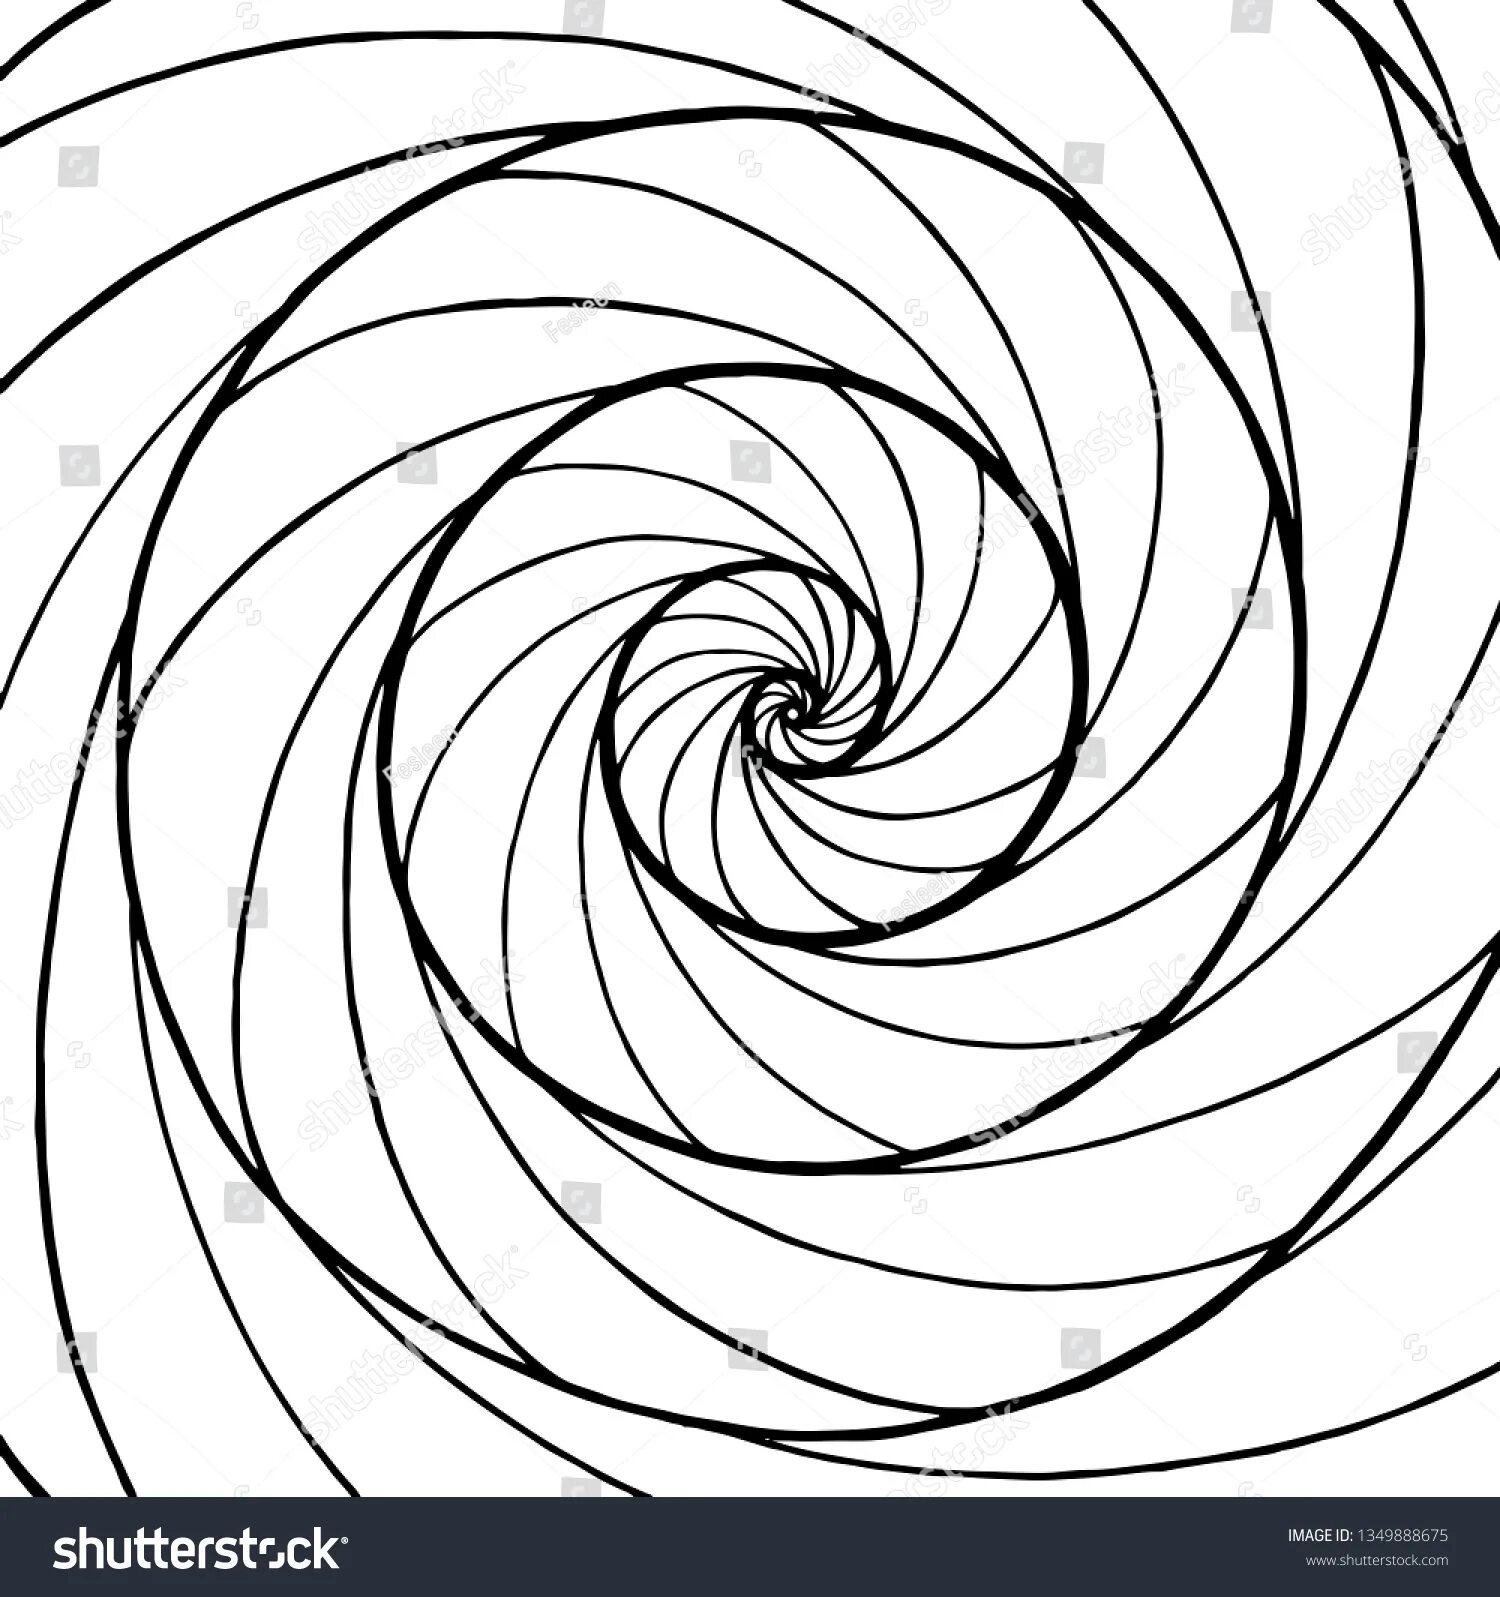 Program #6 spiral according to its own photo